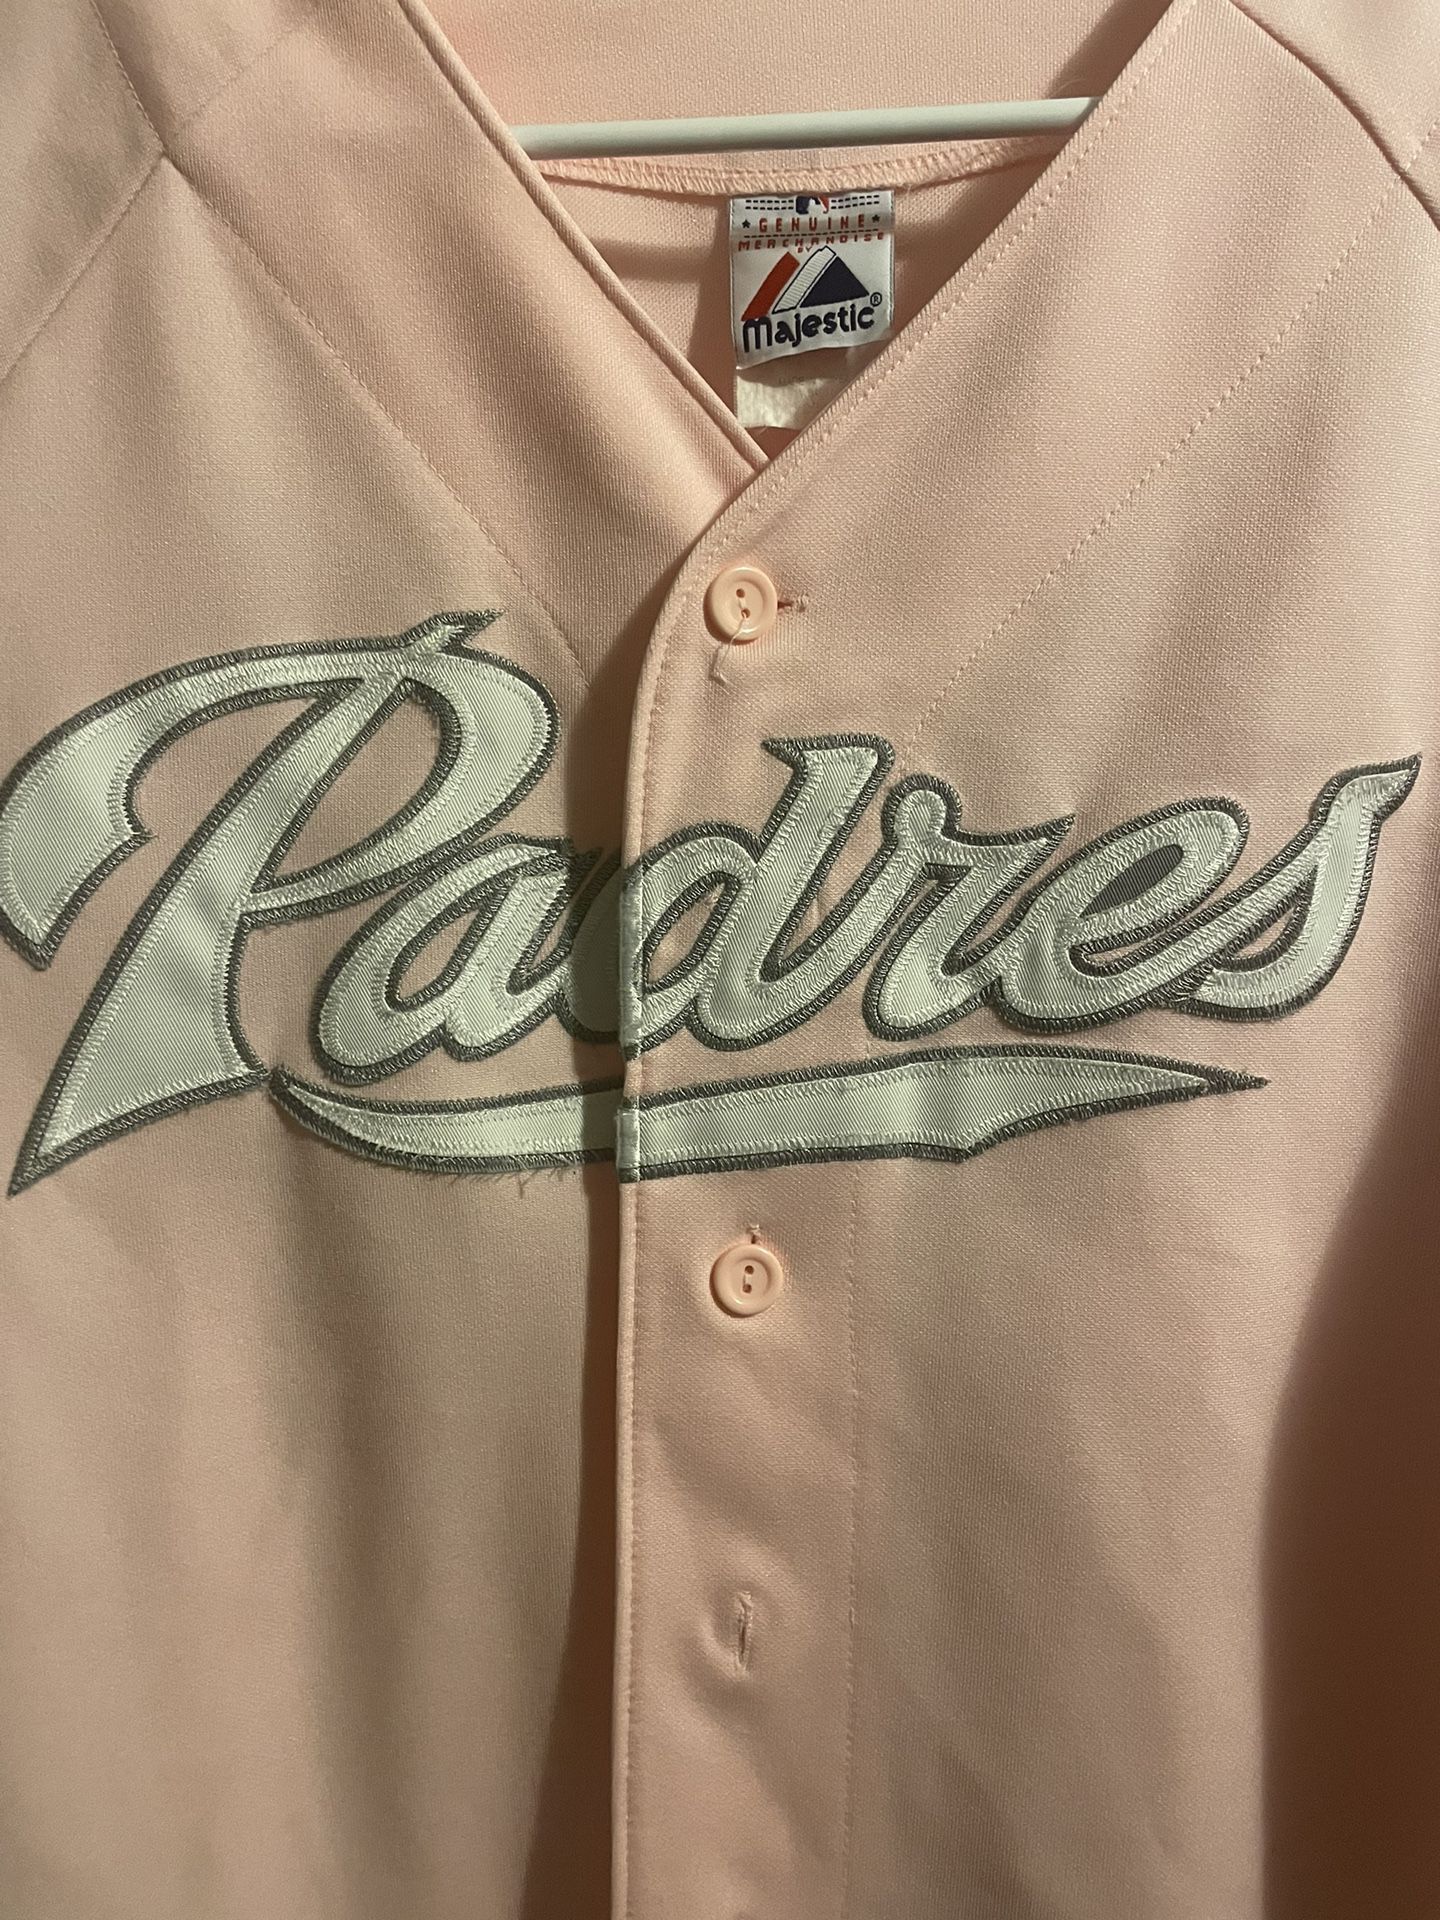 padres pink and green jersey